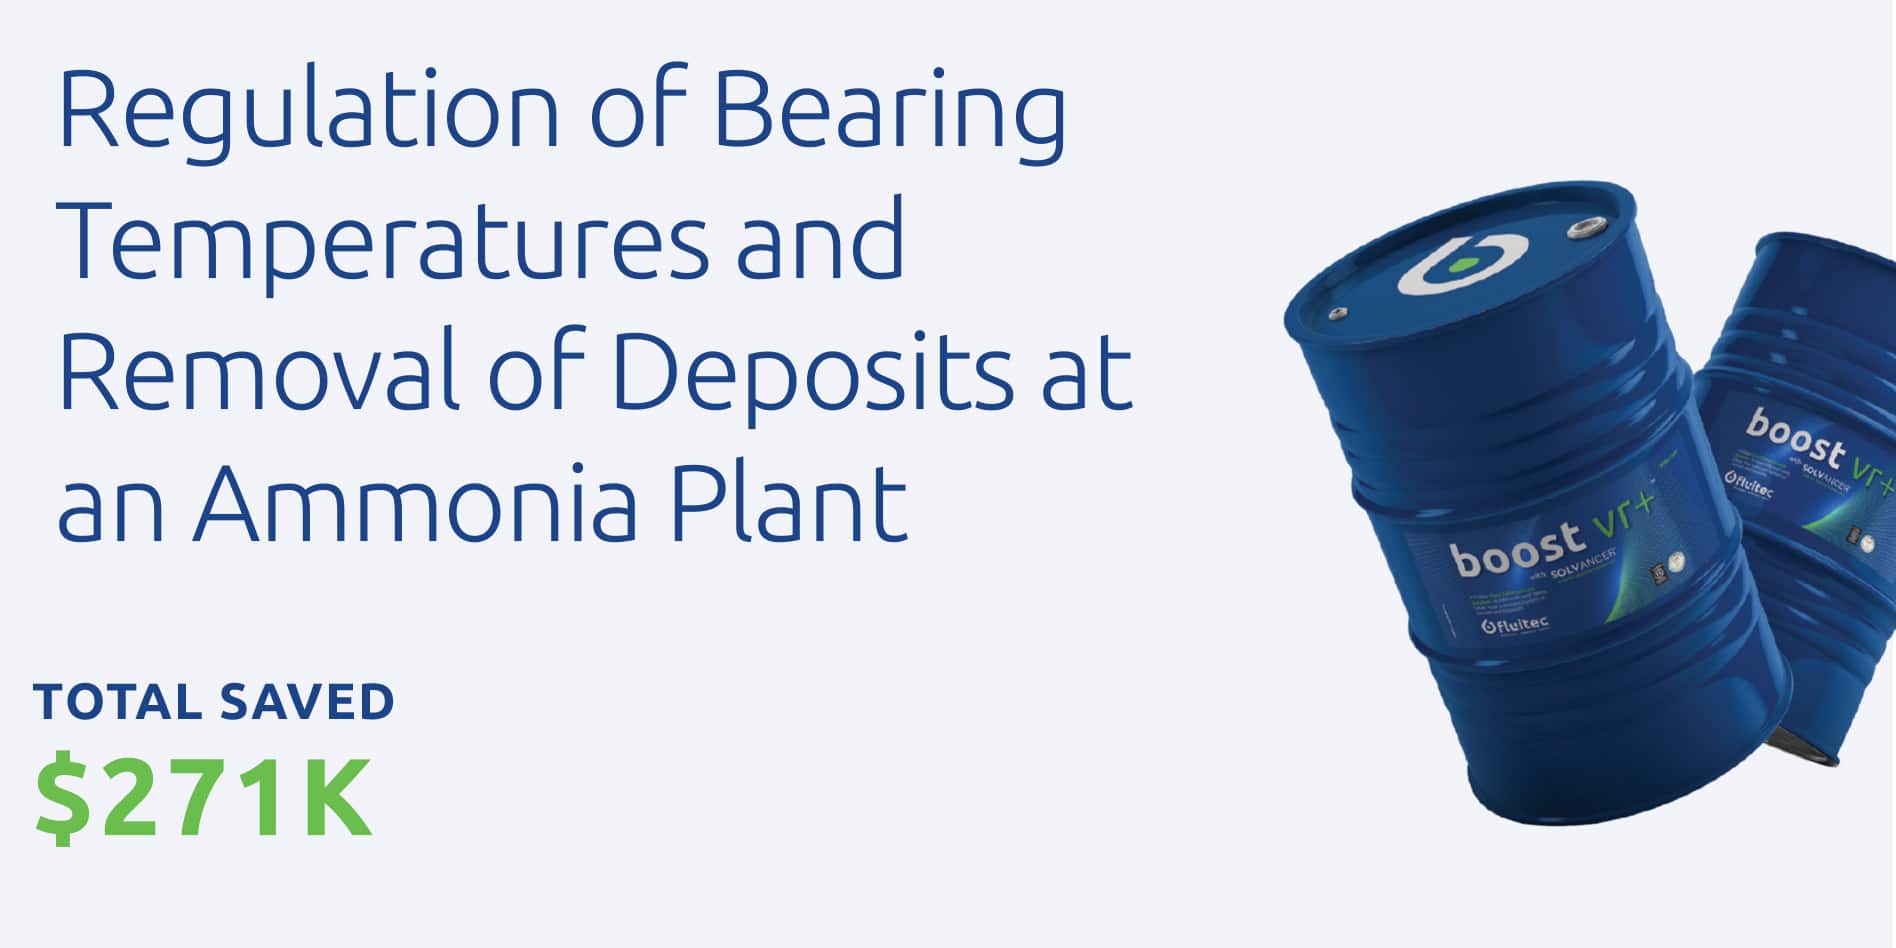 Regulation of Bearing Temperatures and Removal of Deposits at an Ammonia Plant